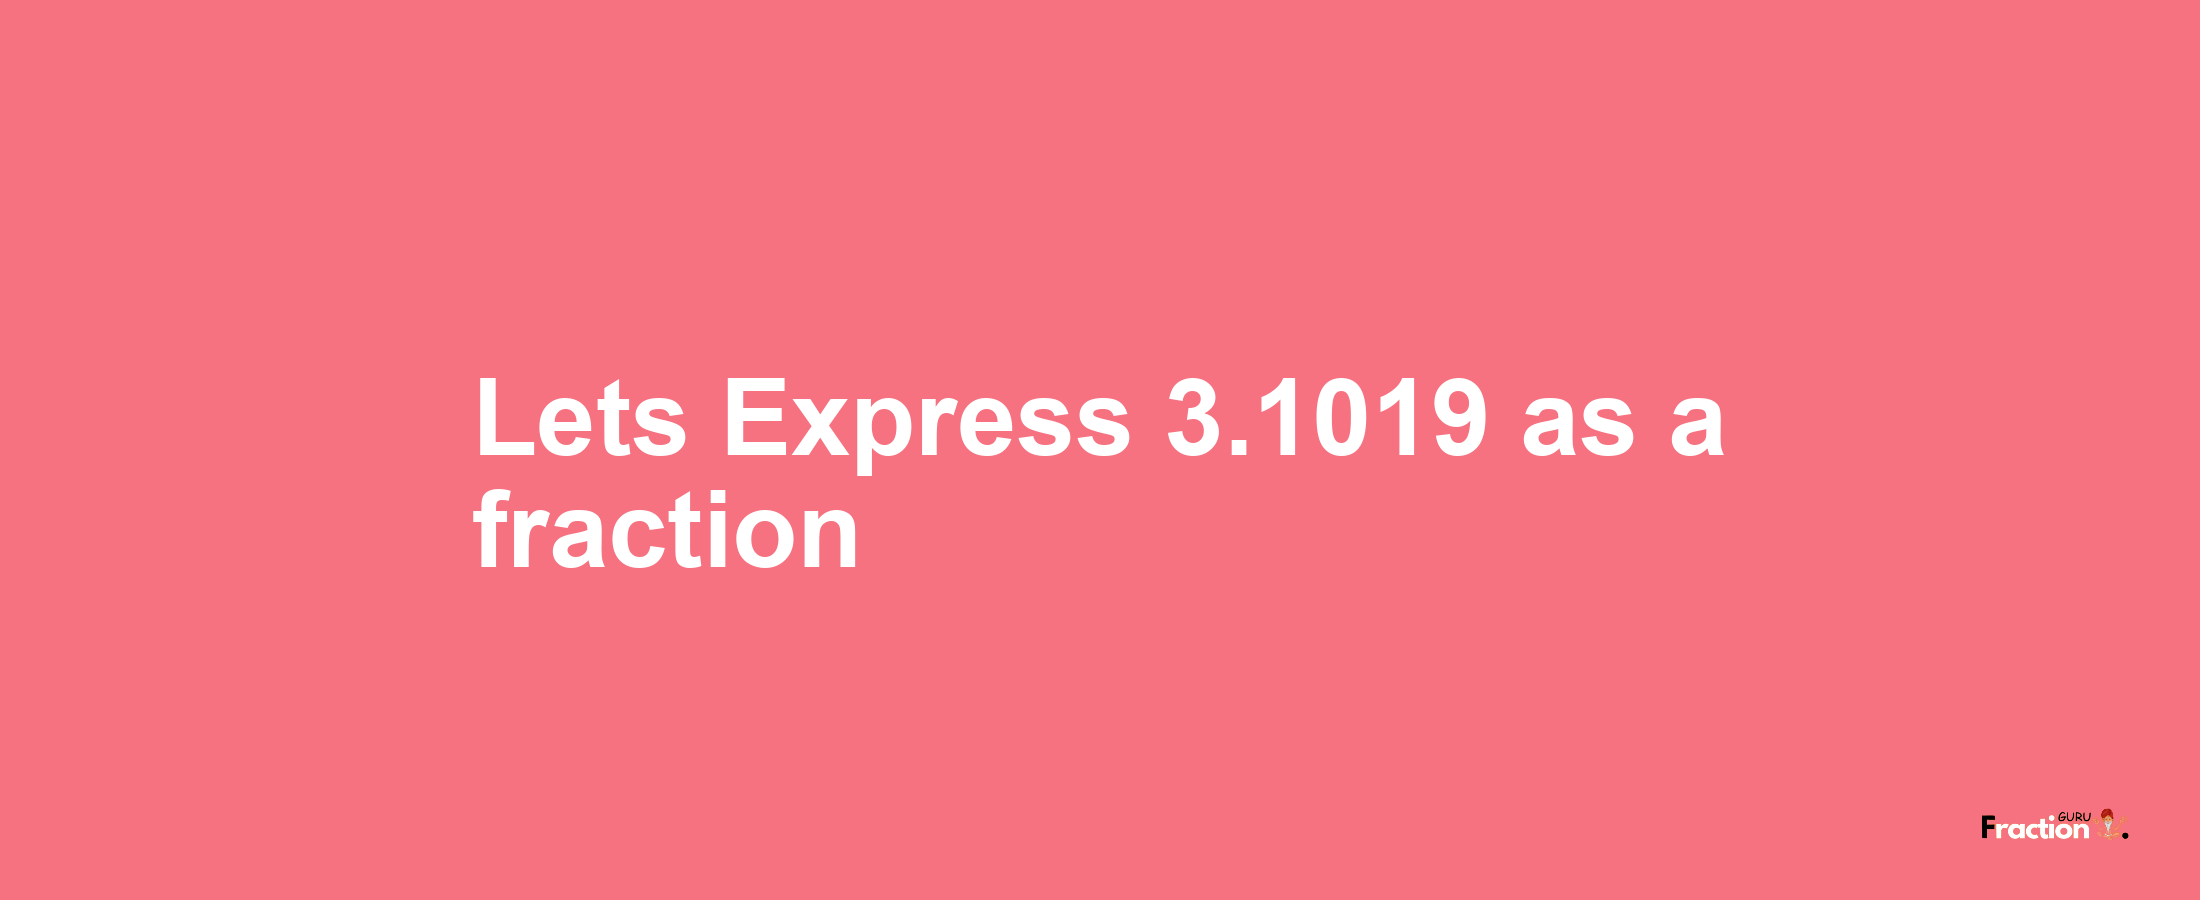 Lets Express 3.1019 as afraction